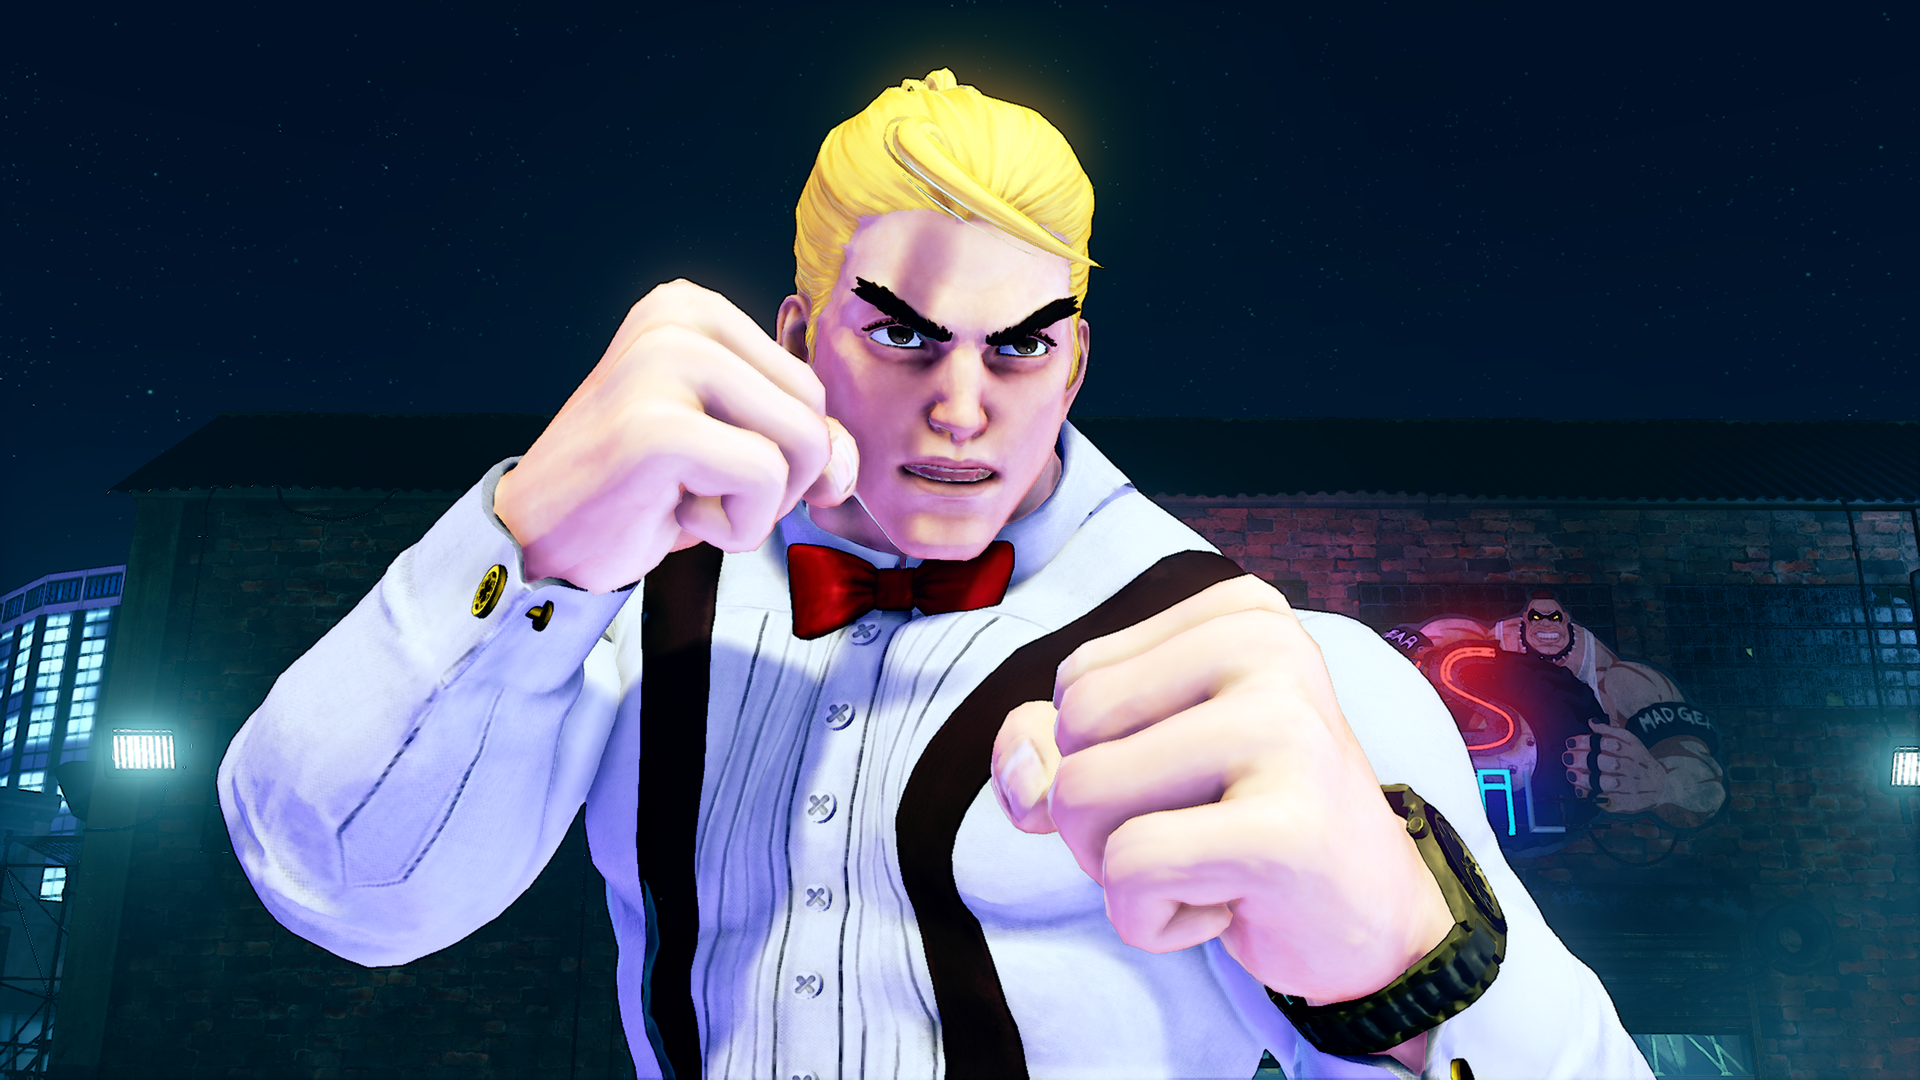 streetfighterv_201707qjs0s.png